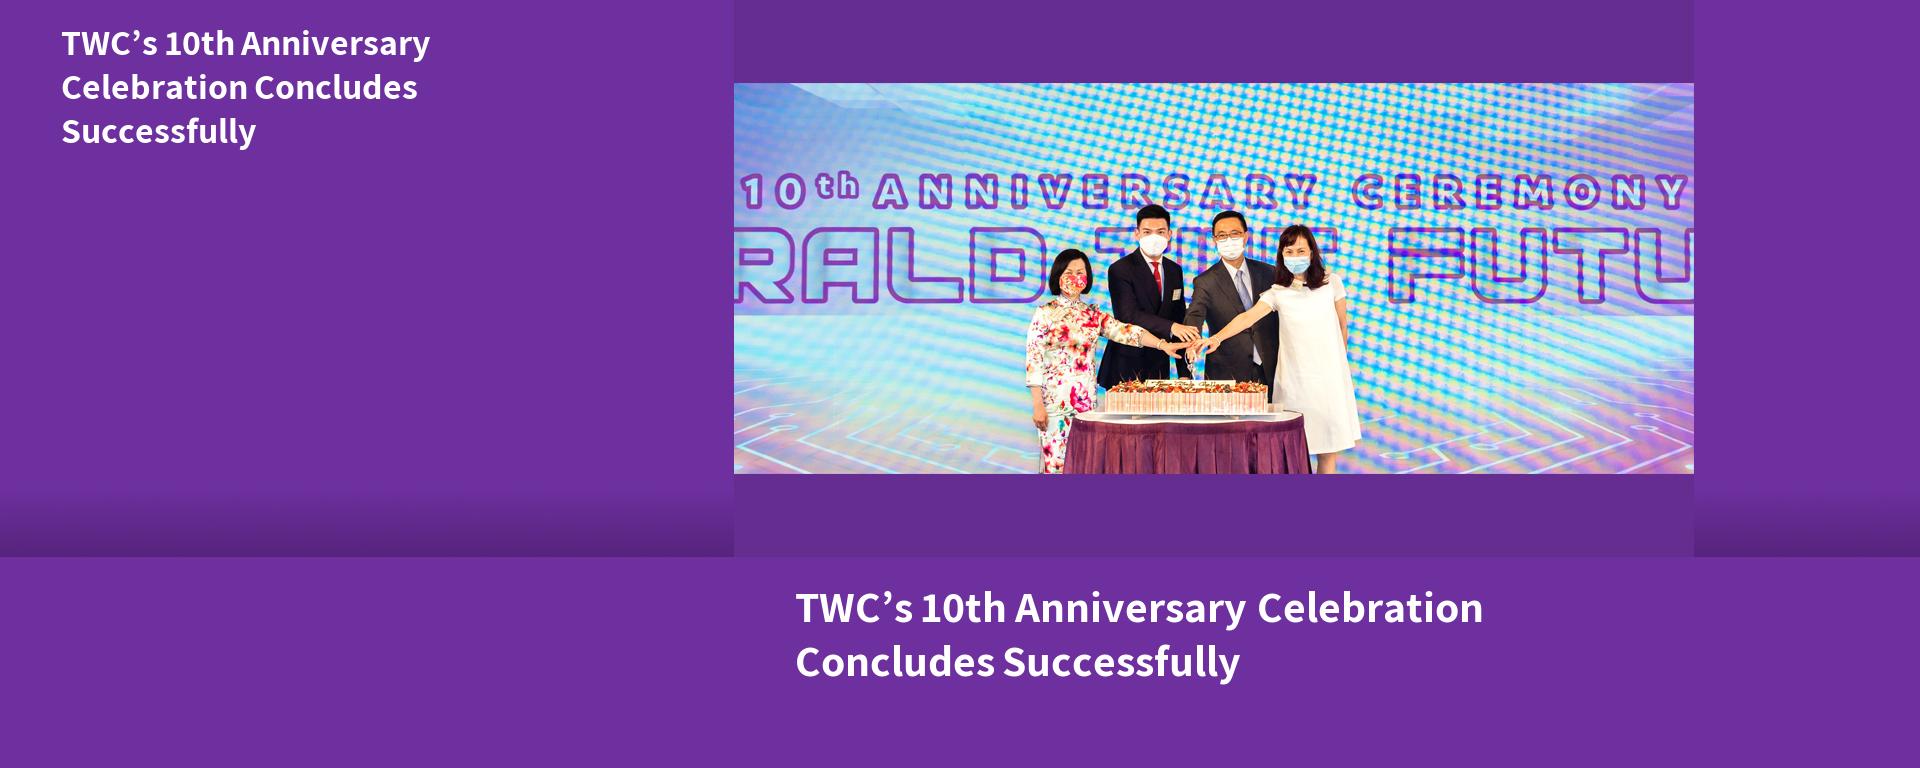 TWC’s 10th Anniversary Celebration Concludes Successfully